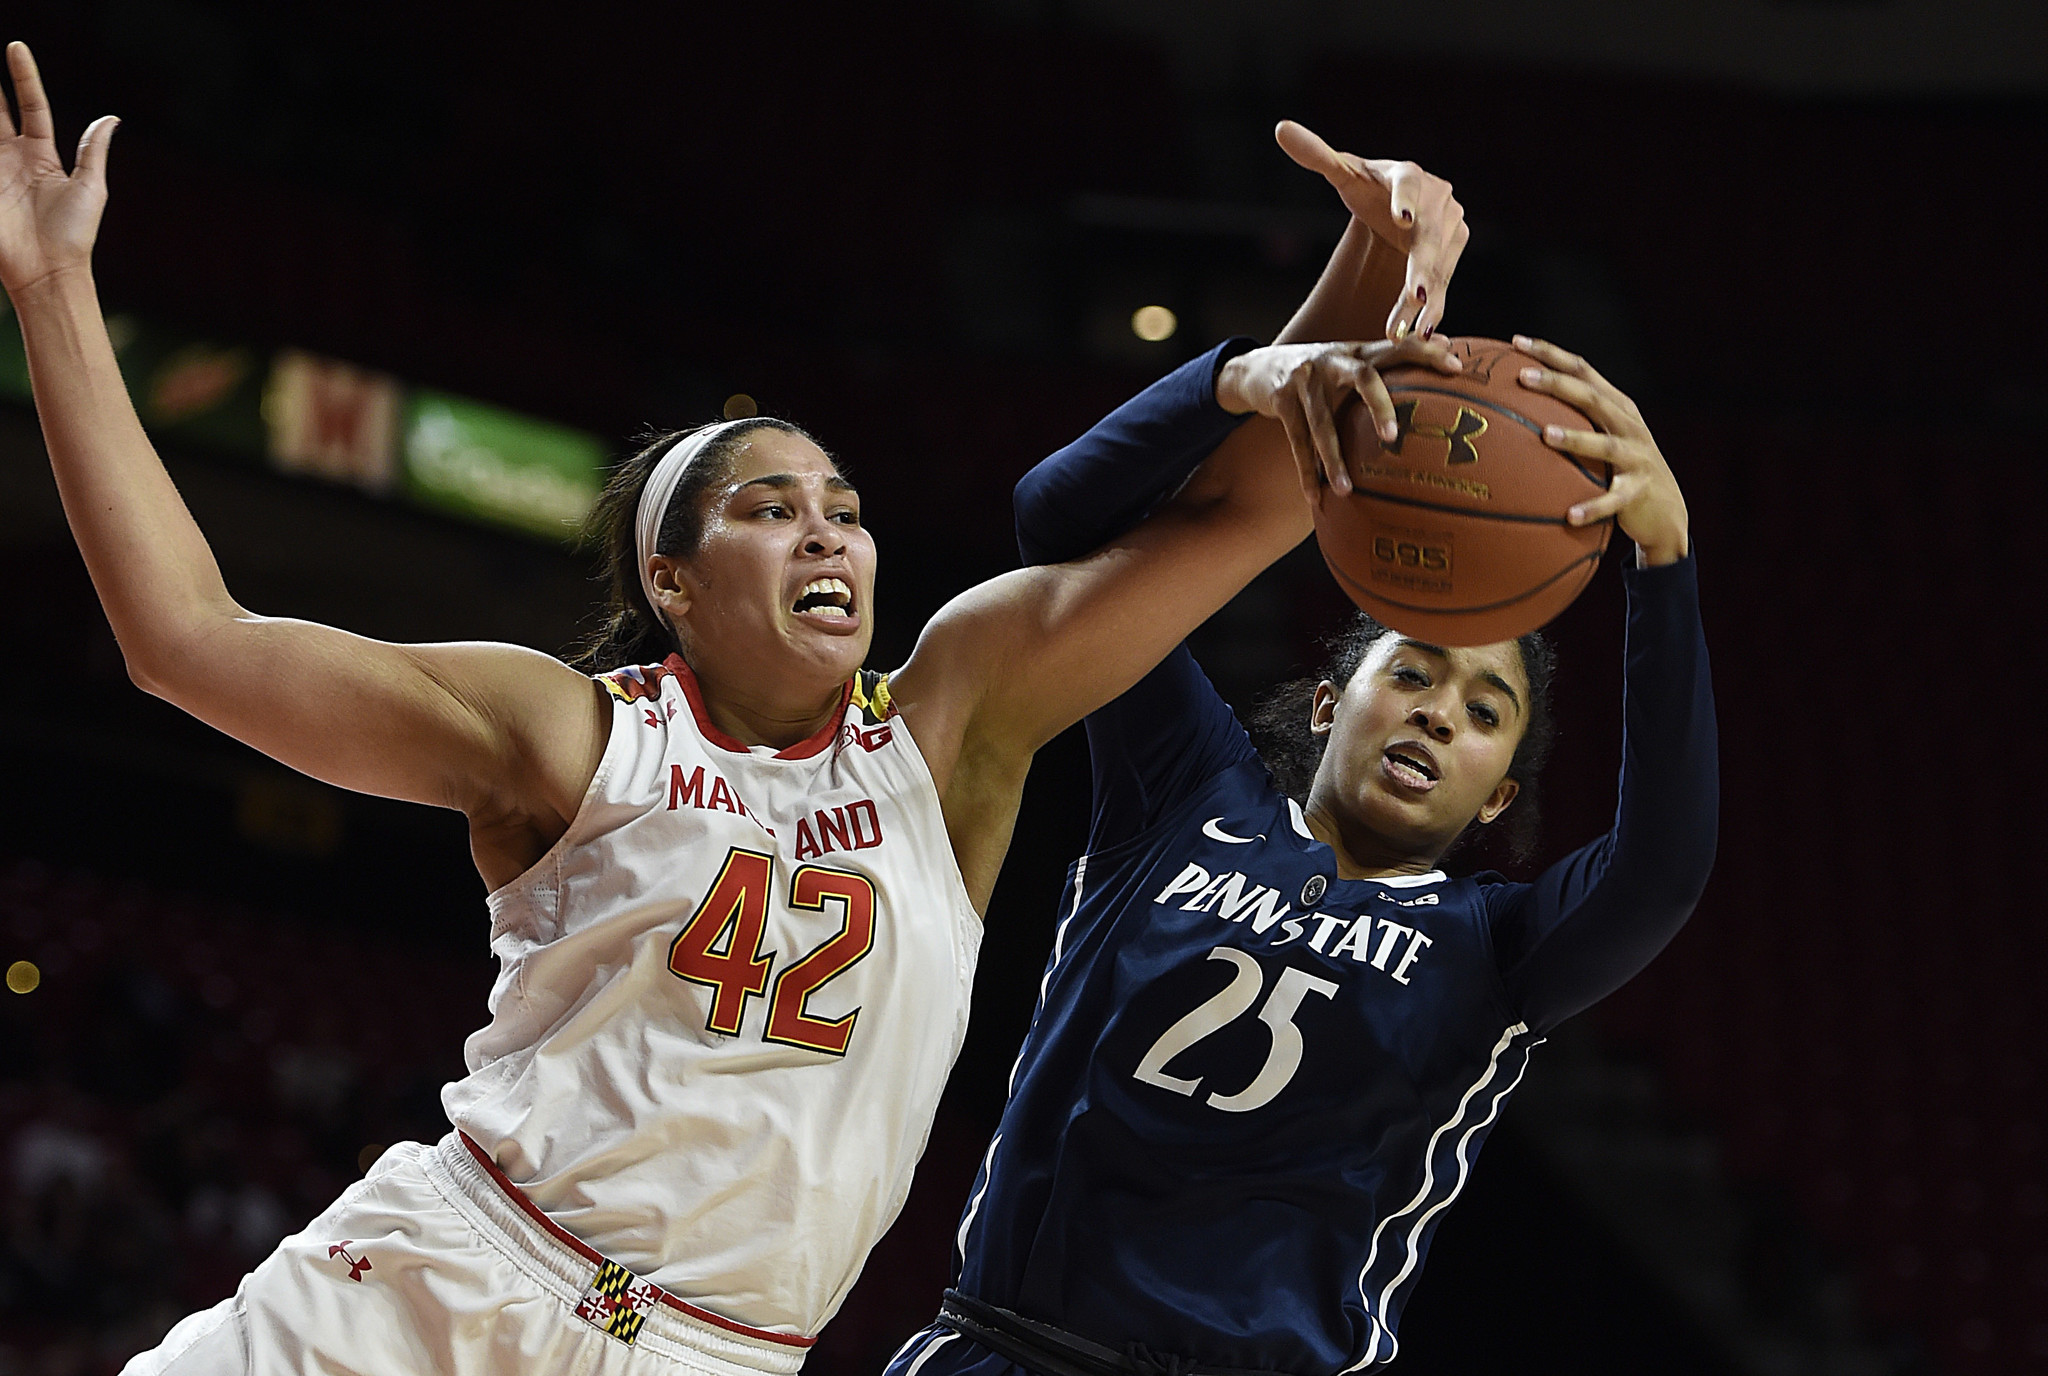 Brionna Jones (Aberdeen) ties Terps record with 42 points in narrow win over Penn State - Baltimore Sun